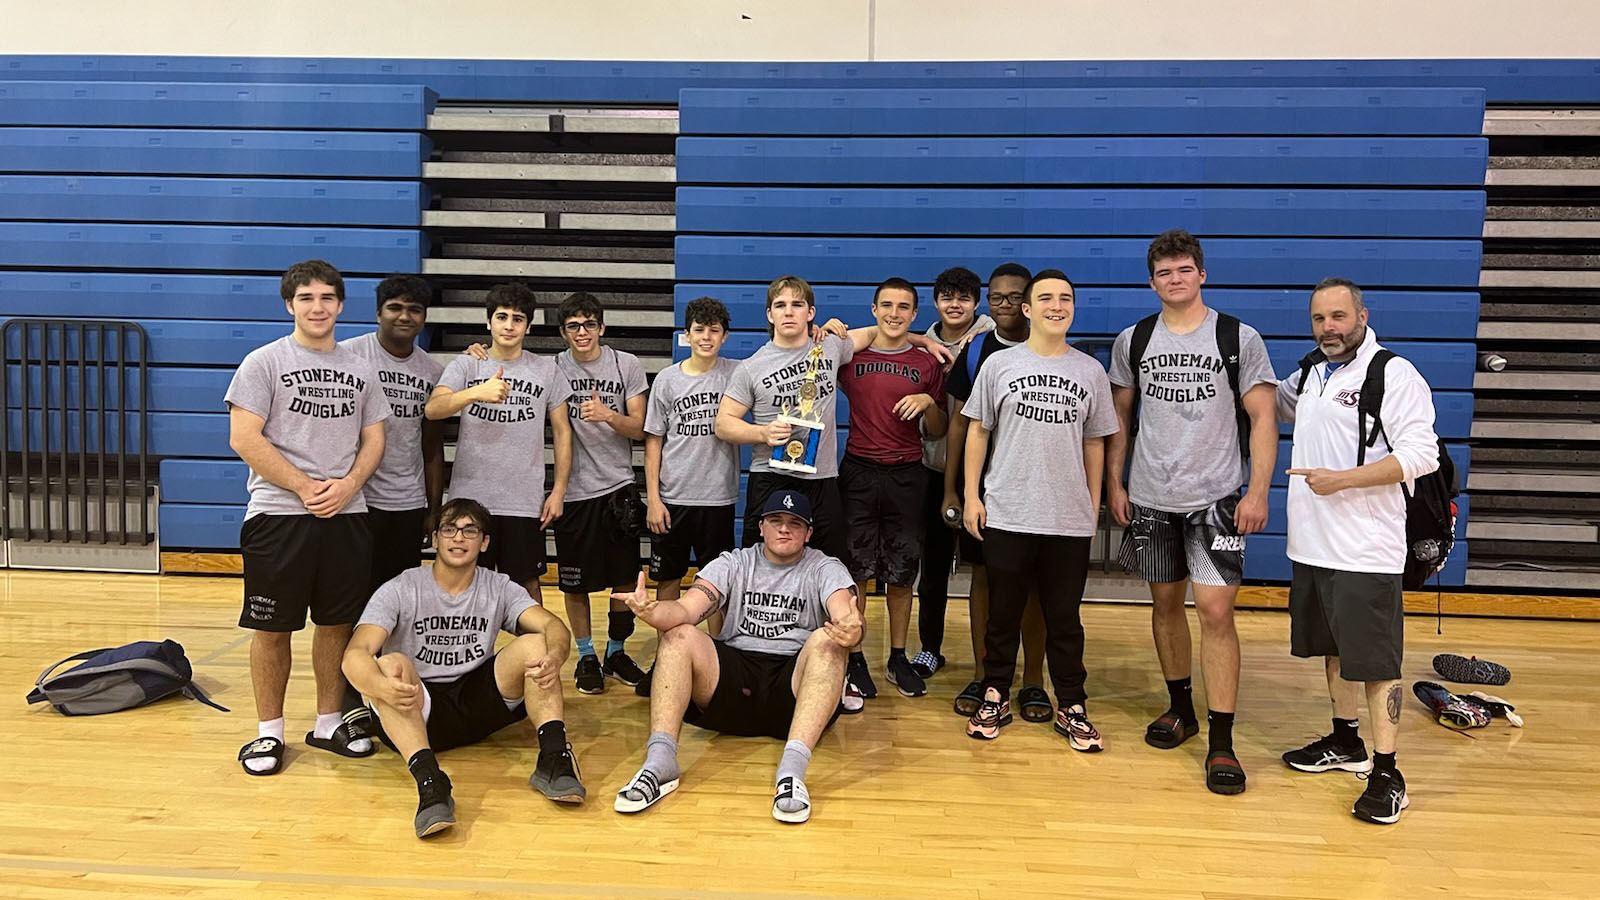 It was a great weekend for the Marjory Stoneman Douglas wrestling team with Charles Dion coming in first place in the Cypress Bay Tournament.